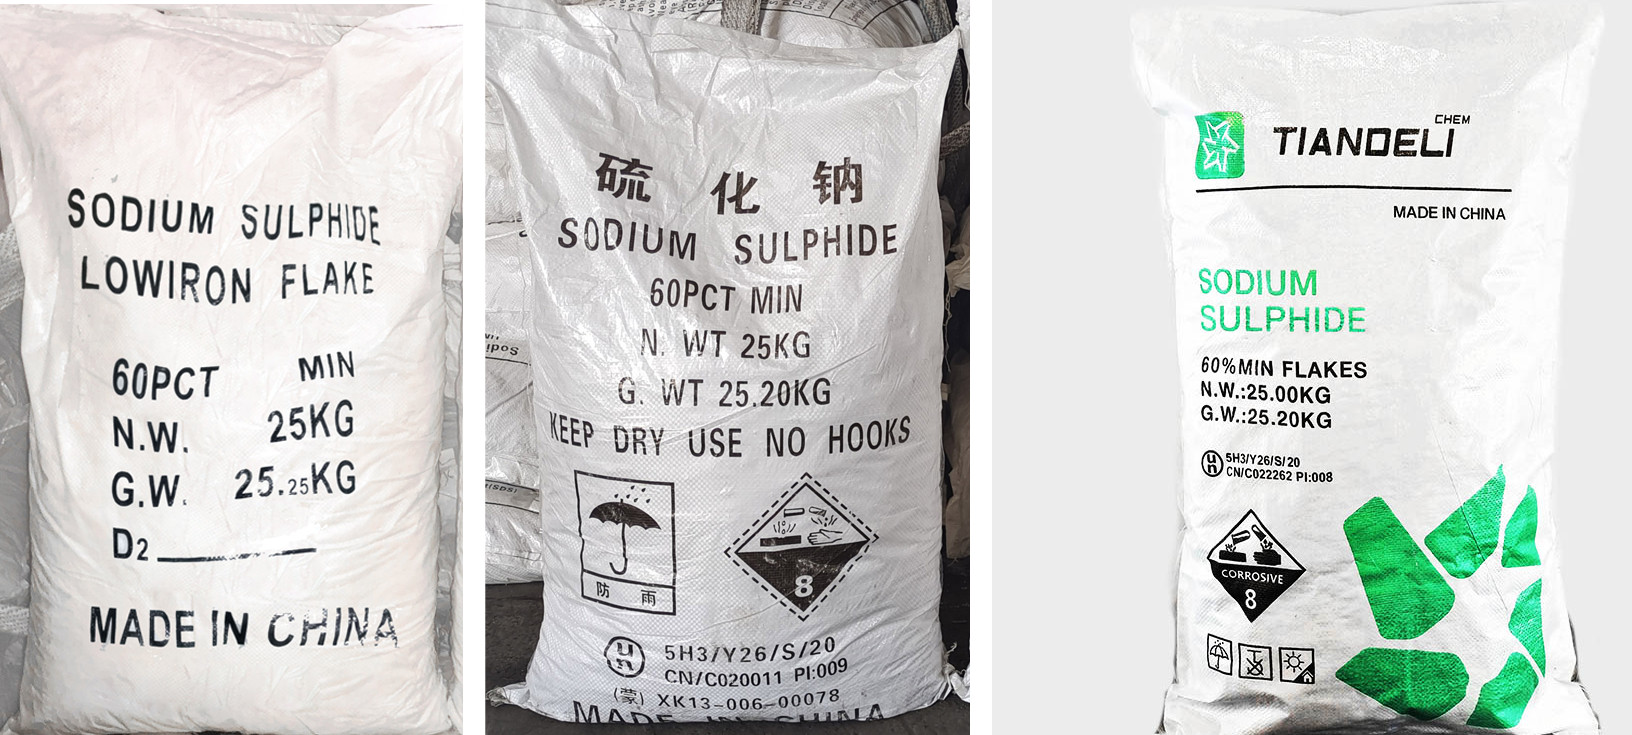 Sodium Sulphide Yellow flakes (anhydrous, solid, hydrated)